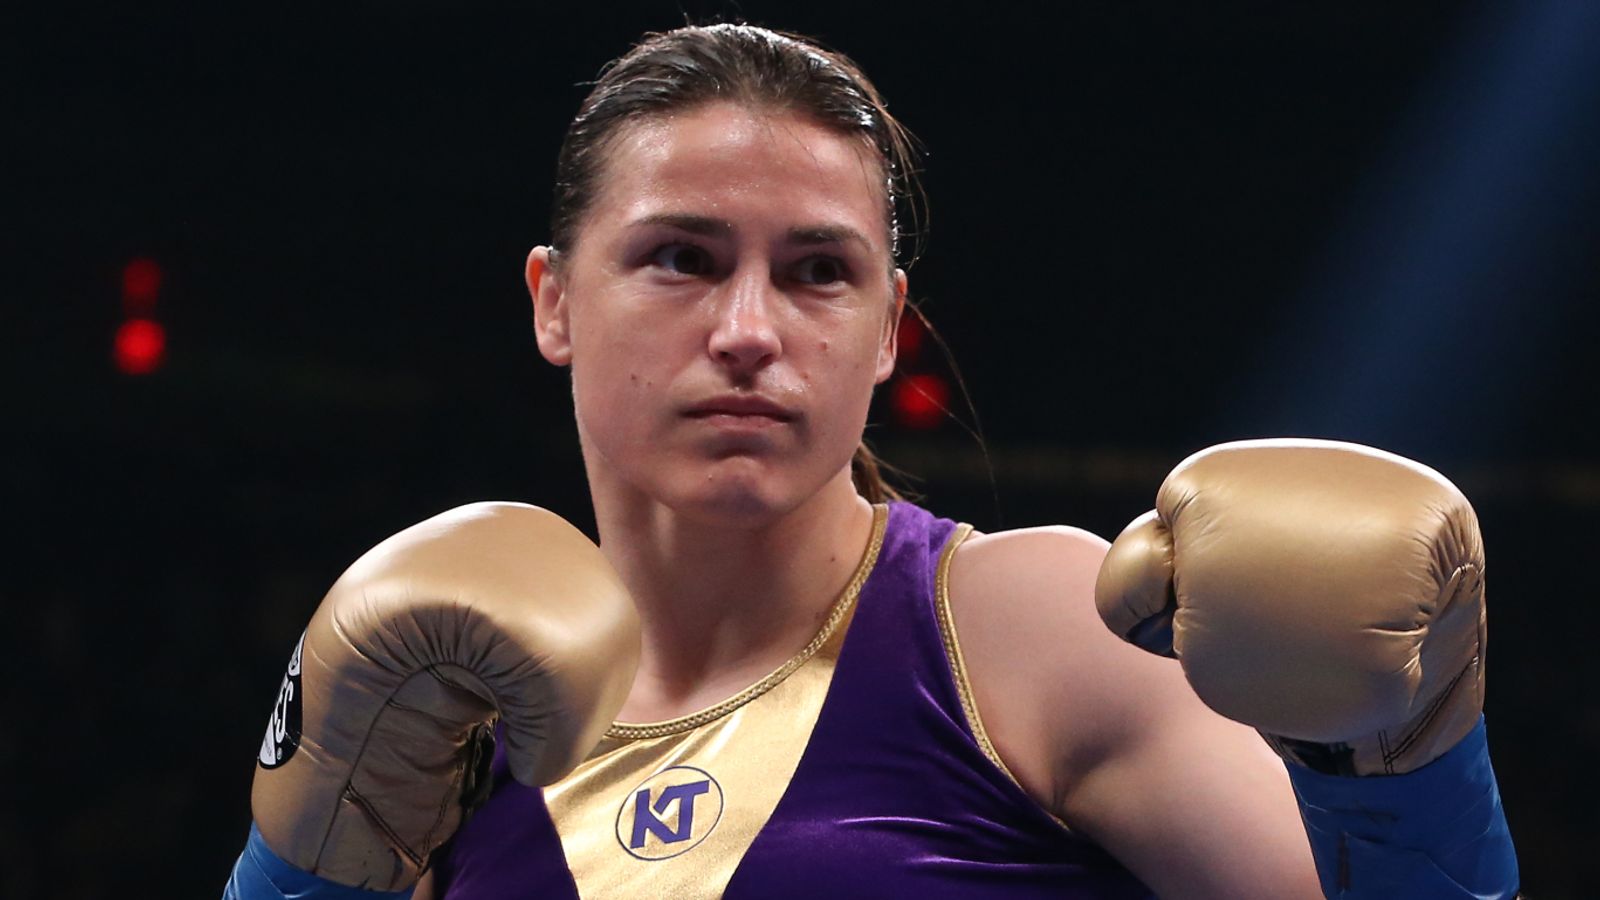 Katie Taylor was aware of criticism after Delfine Persoon win